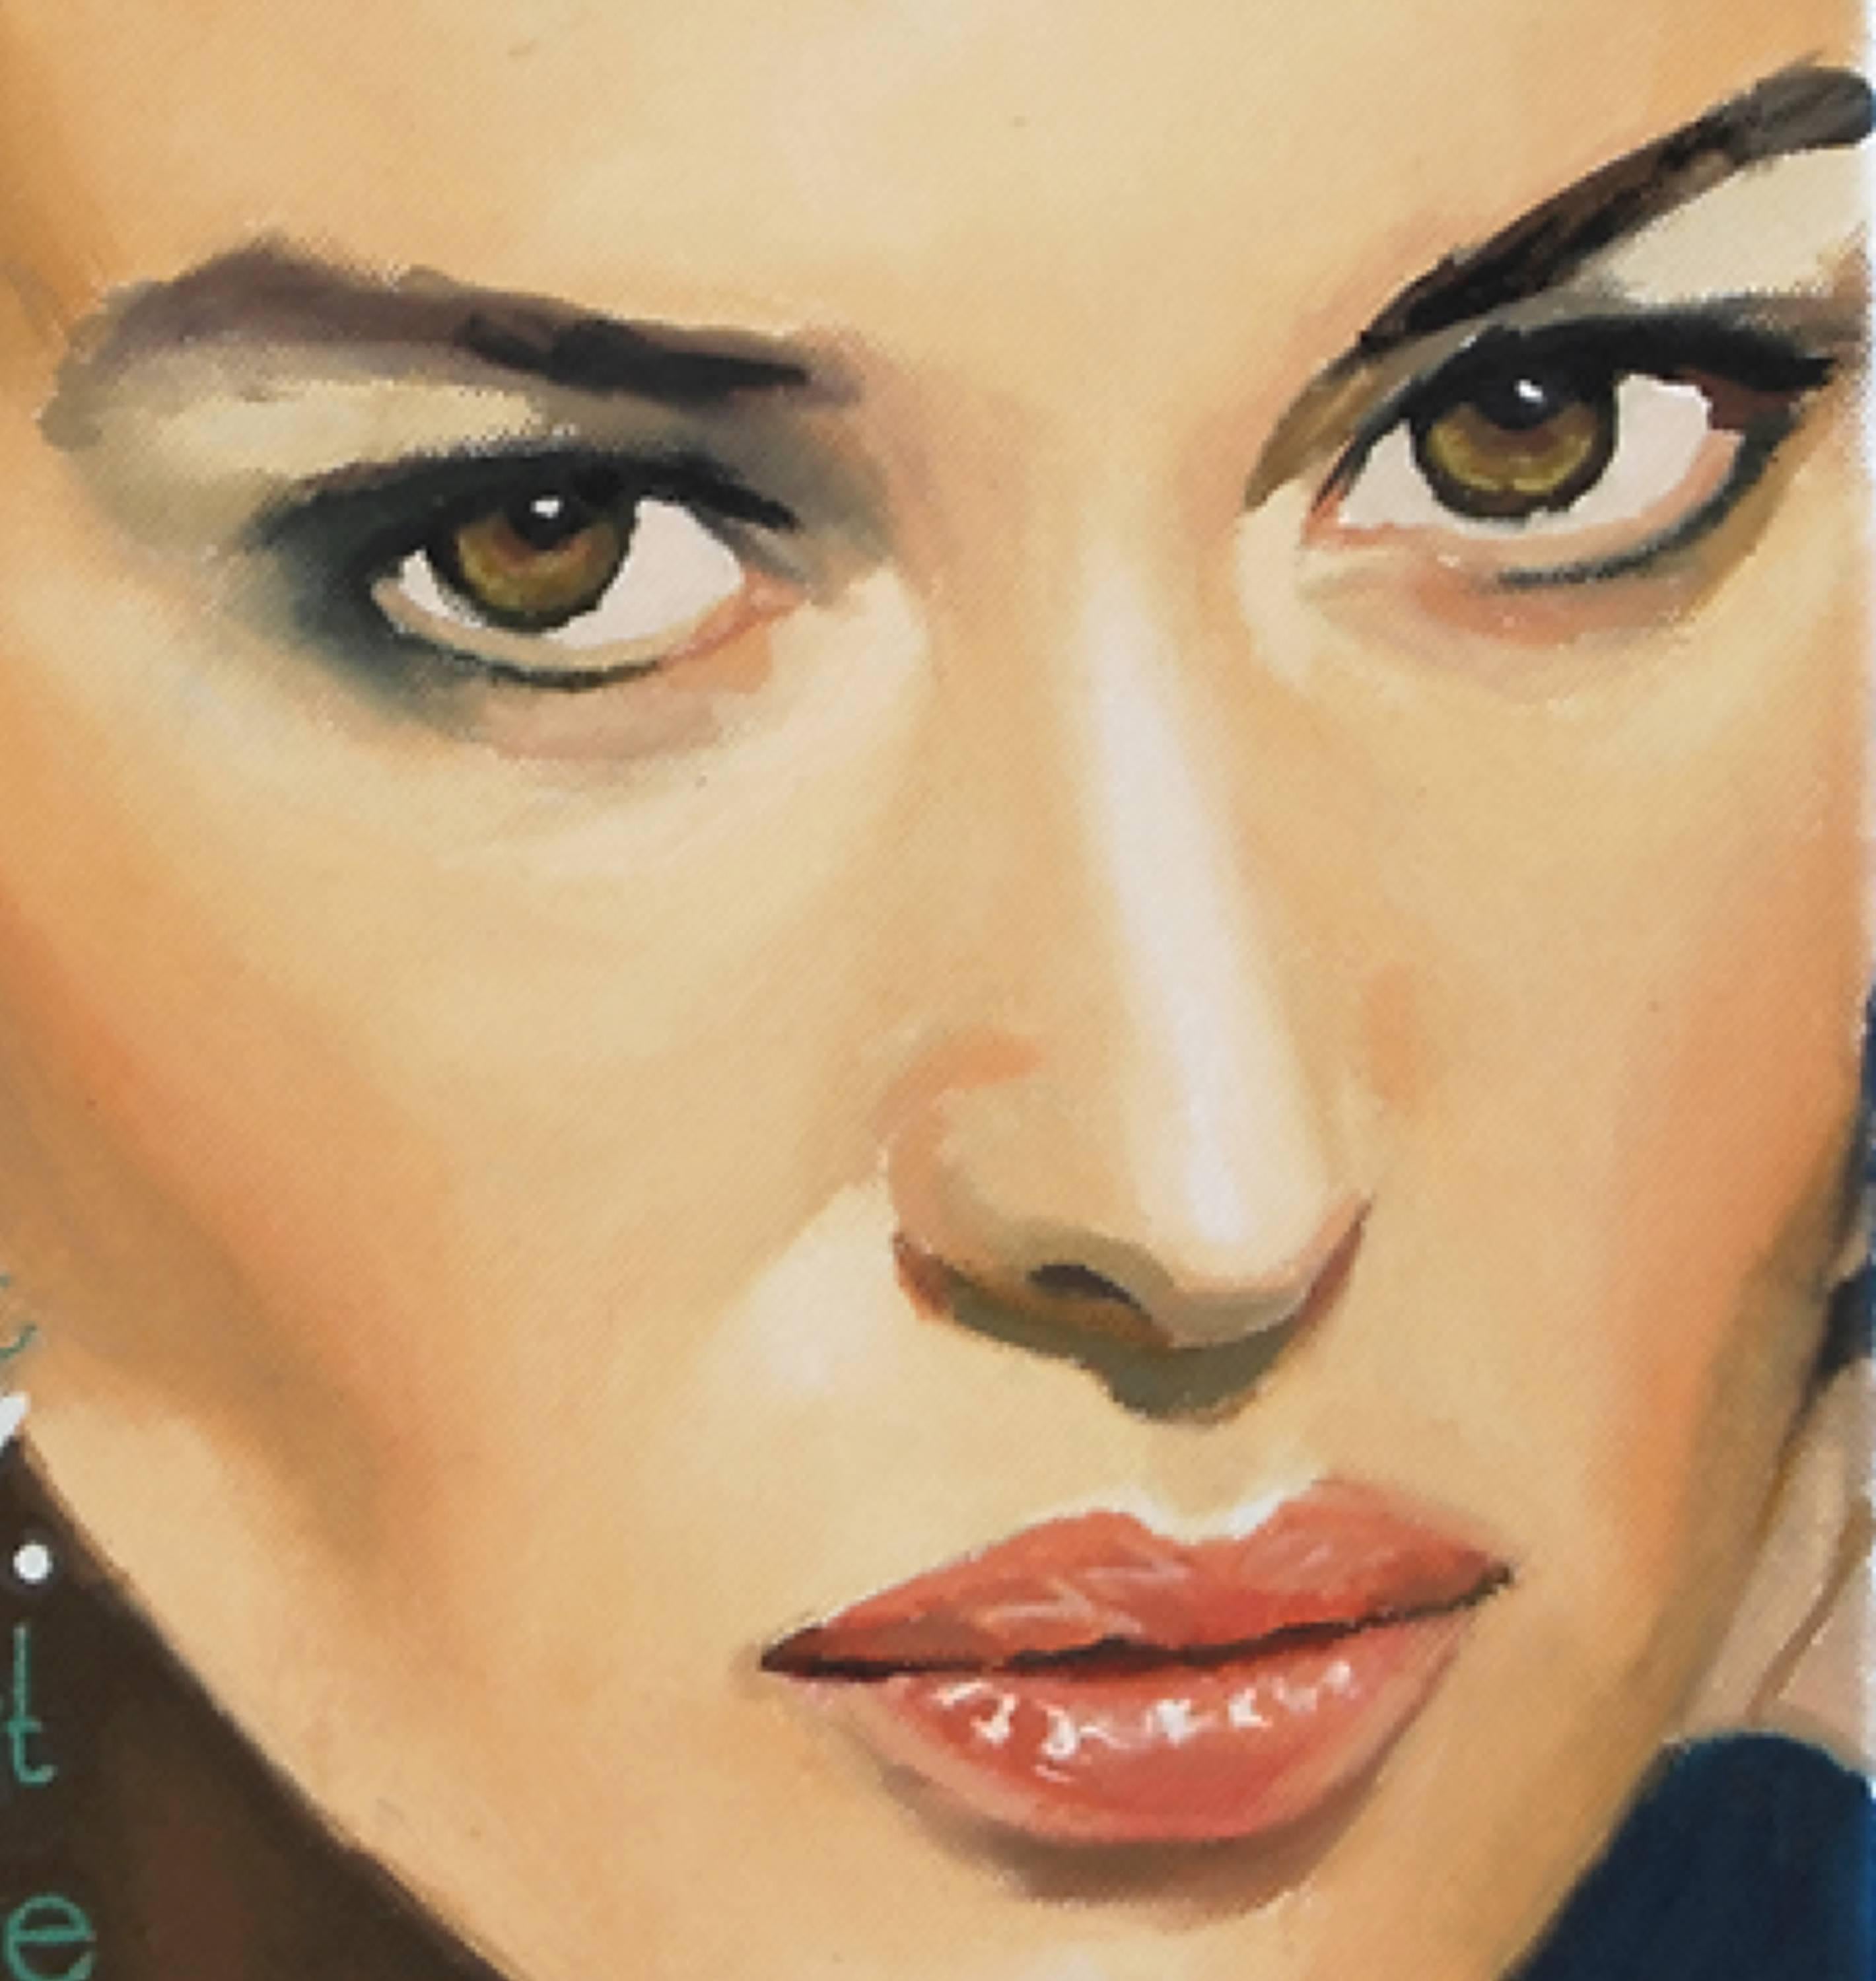 Candy Eyes issue #8 - Contemporary, Female, Figurative, Oil on Canvas, Portrait - Photorealist Painting by Mihai Florea